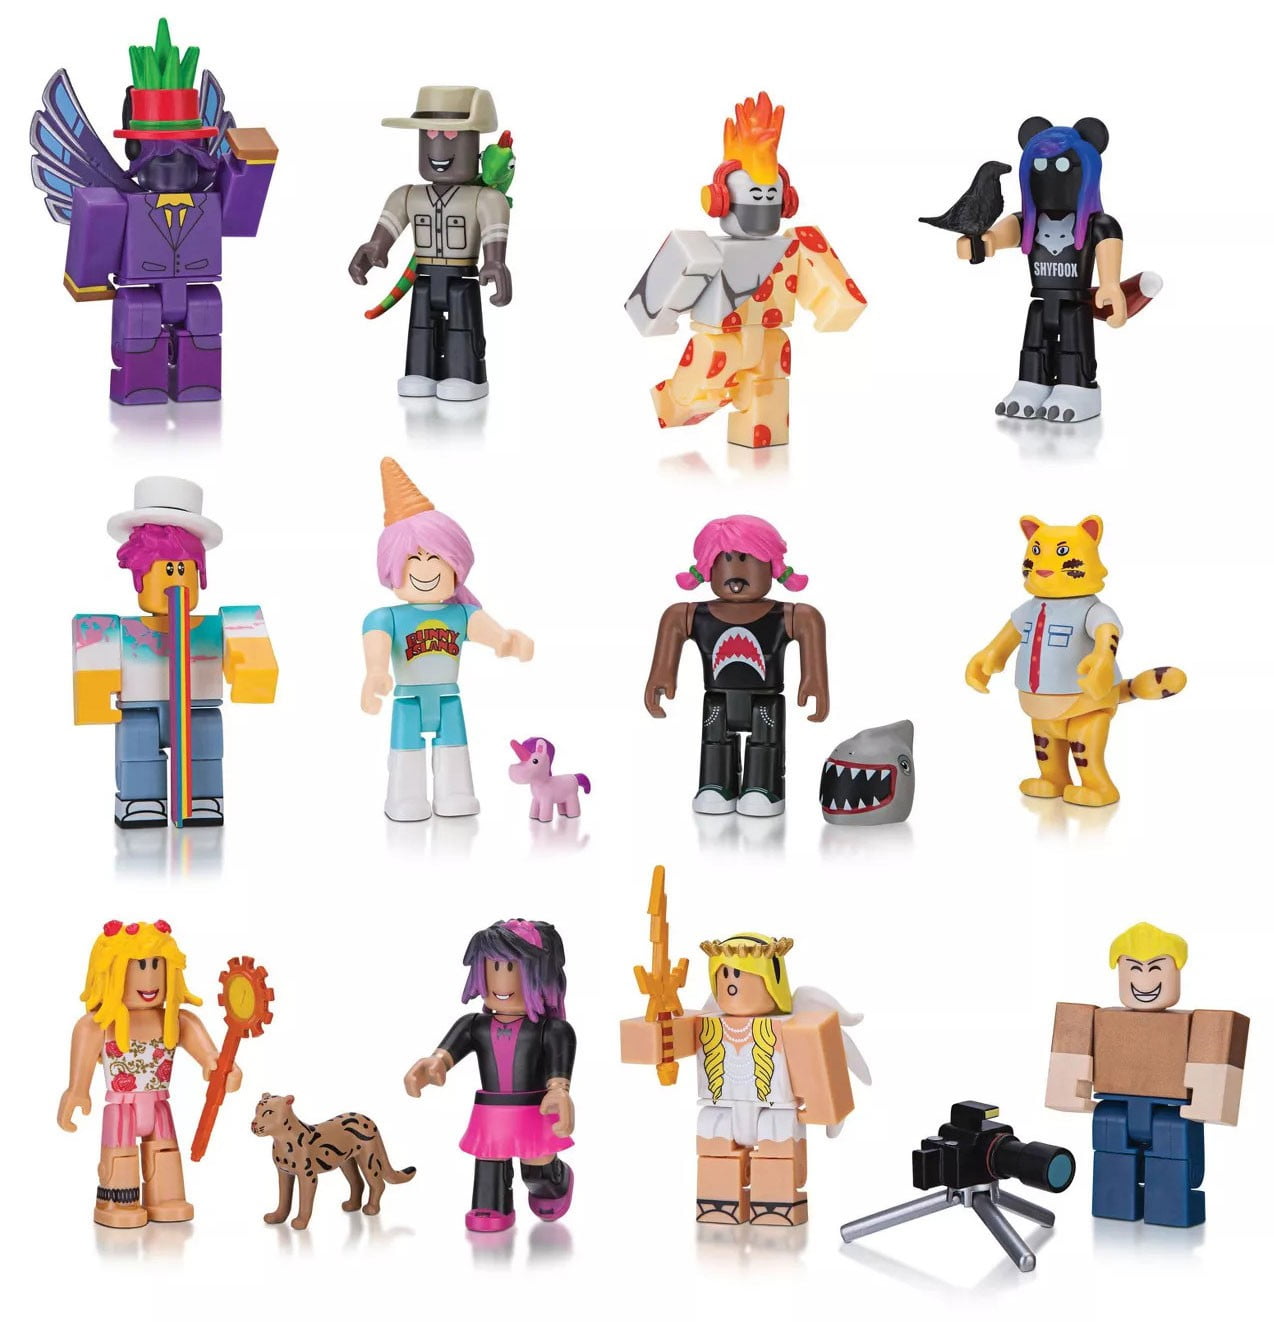 Roblox Series 2 Celebrity Collection Figure 12 Pack Set Walmart Com Walmart Com - roblox figures 2019